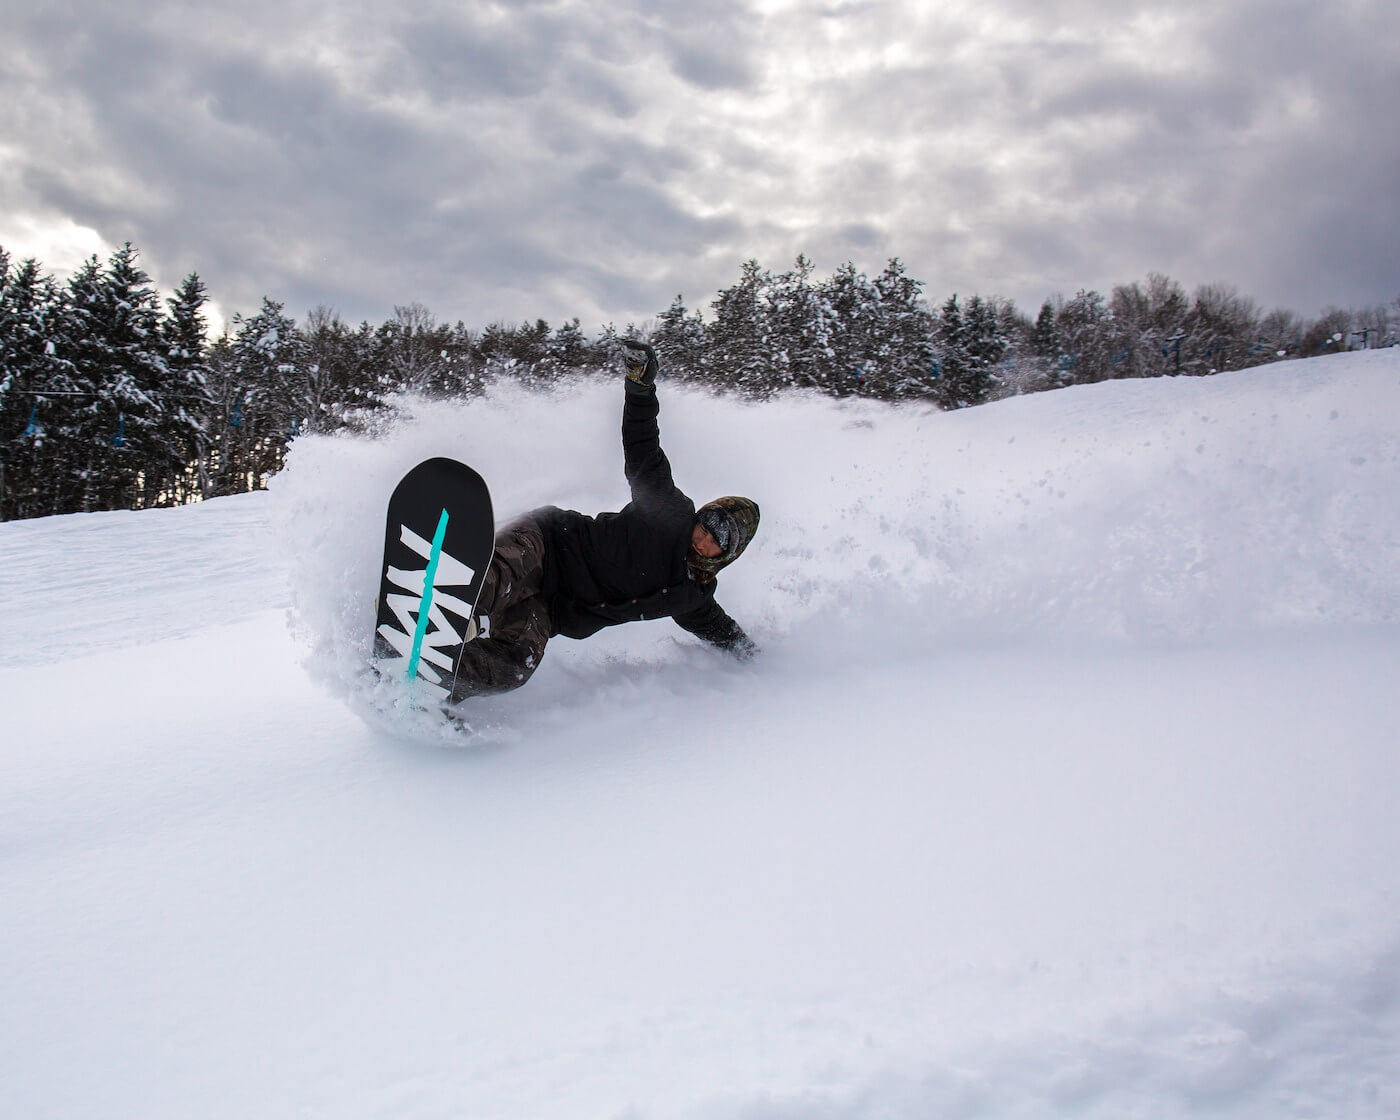 Snowboarder slashing powder at Snow Ridge in the snowiest ski resorts in upstate New York in a beautiful snow effect